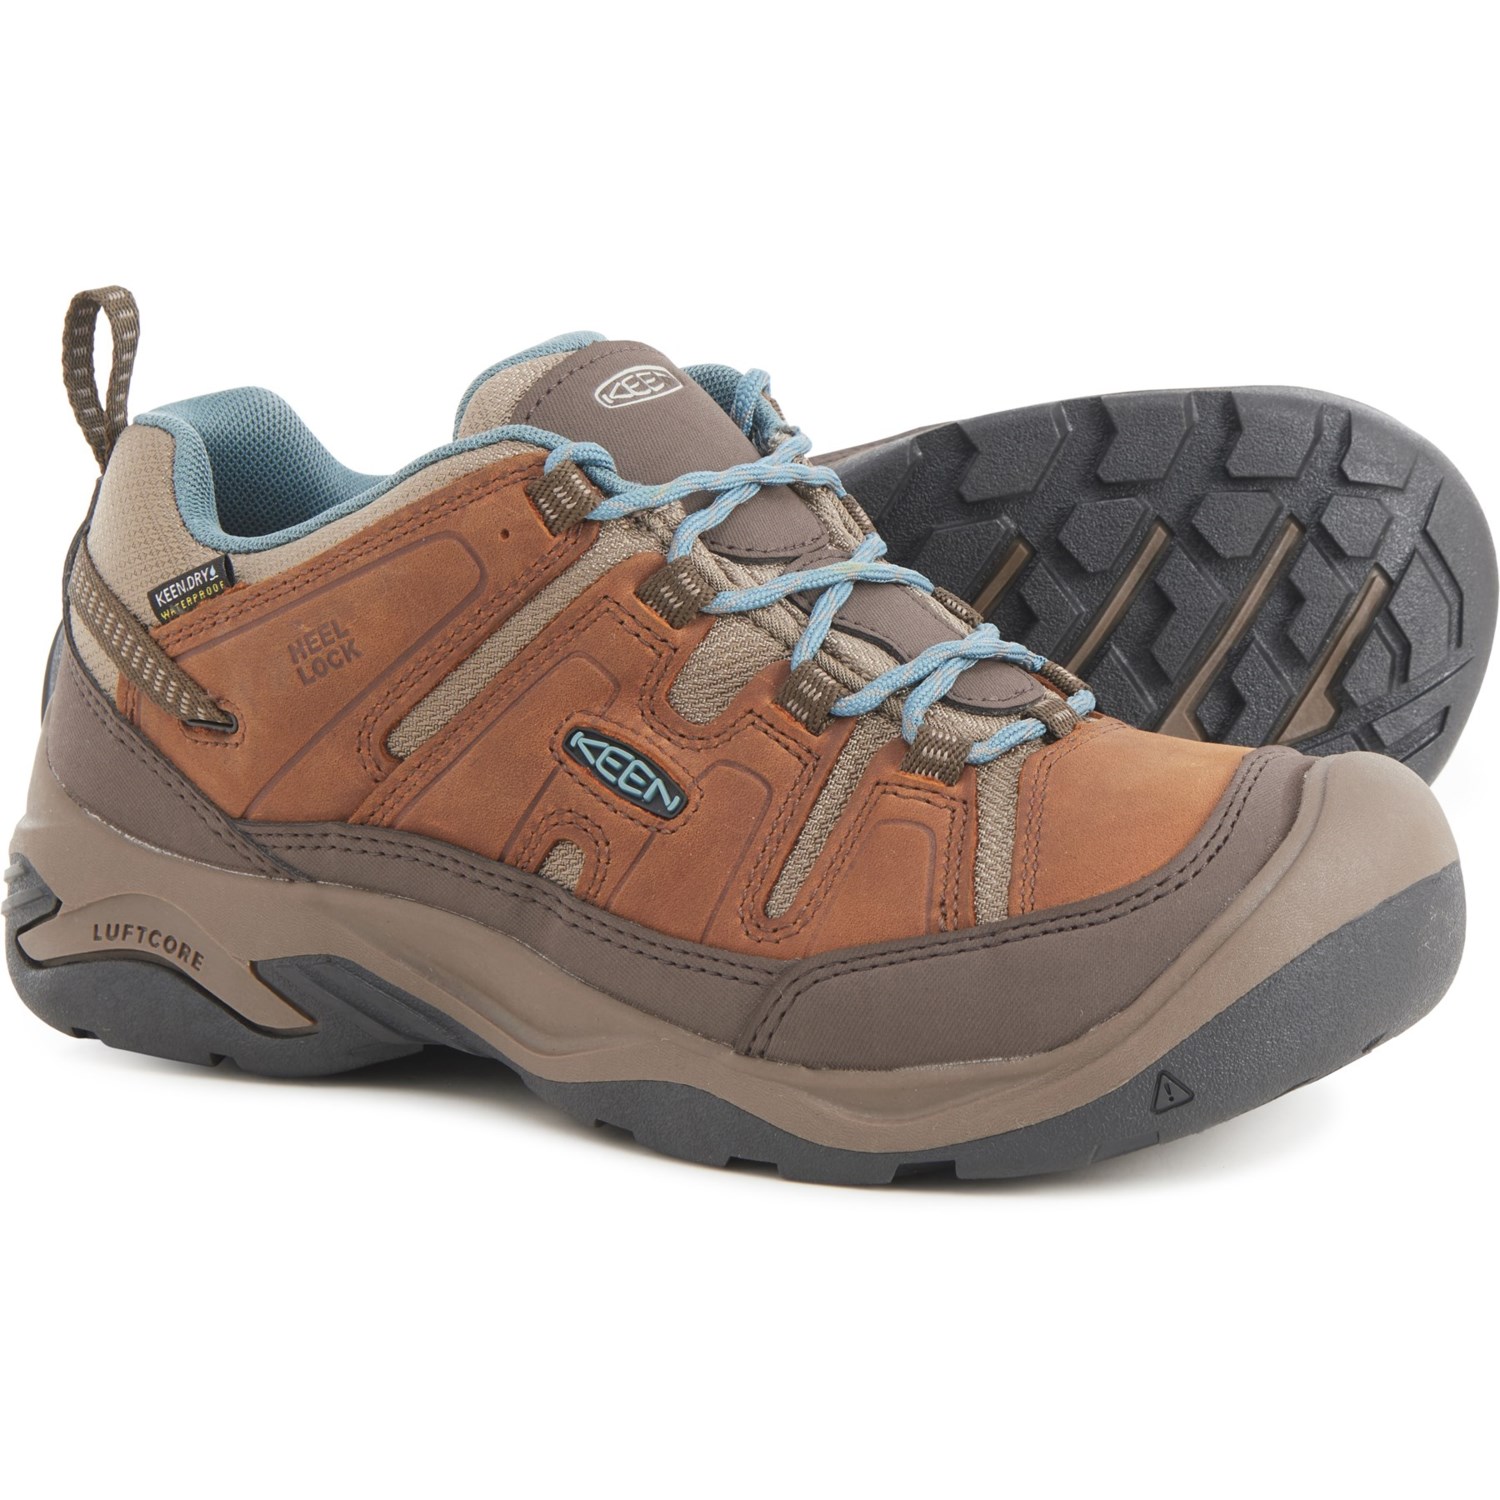 Keen Circadia Hiking Shoes (For Women) - Save 40%